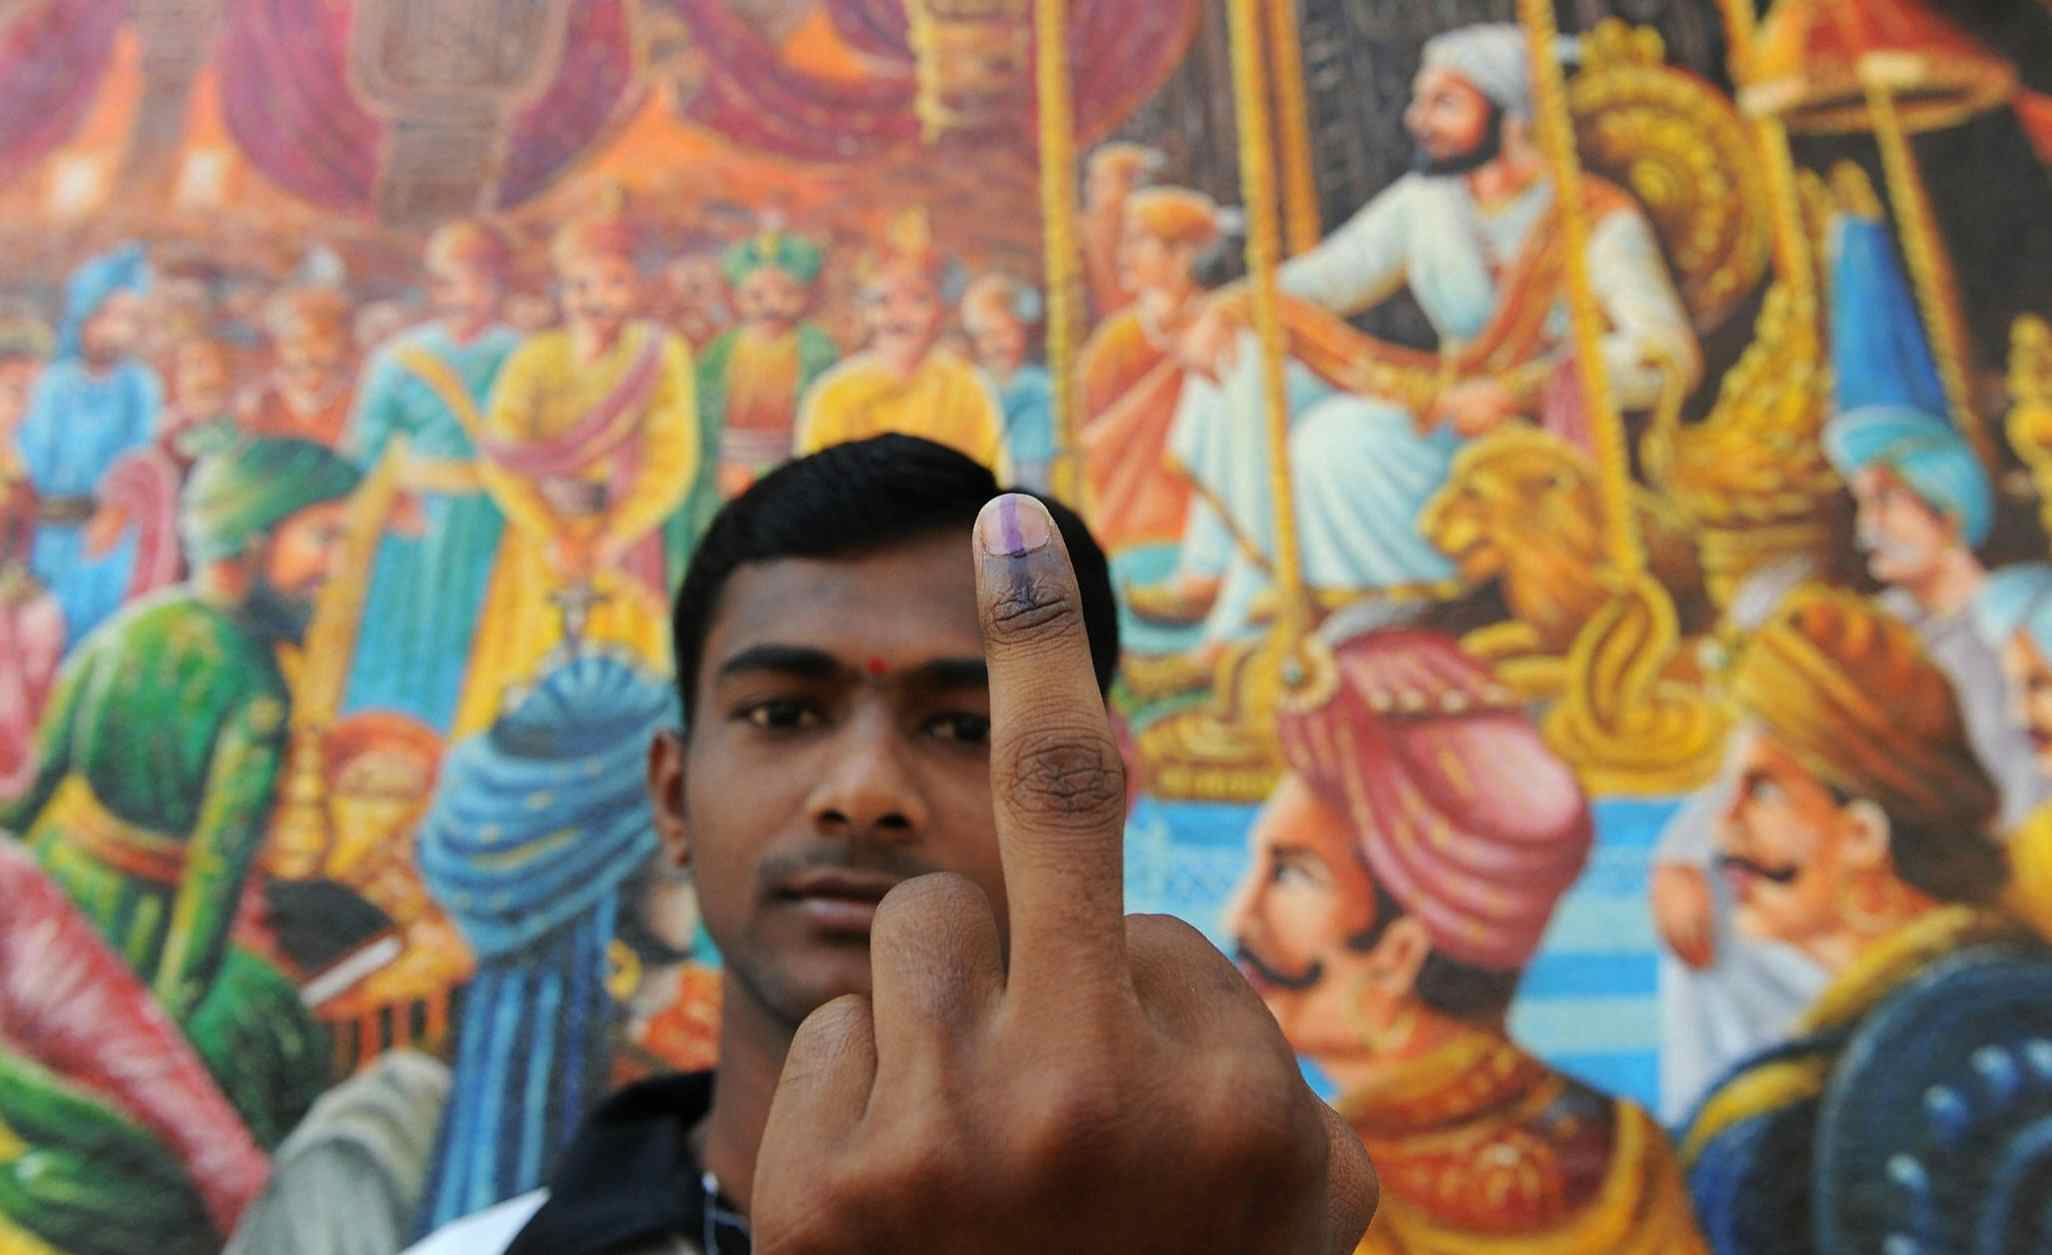 First time Indian voter Rajesh Vichare displays the indelible ink mark that shows he has cast his vote at a primary school in Kondgaon village of Raigad district of Maharashtra on April 23, 2009 (INDRANIL MUKHERJEE/AFP via Getty Images)